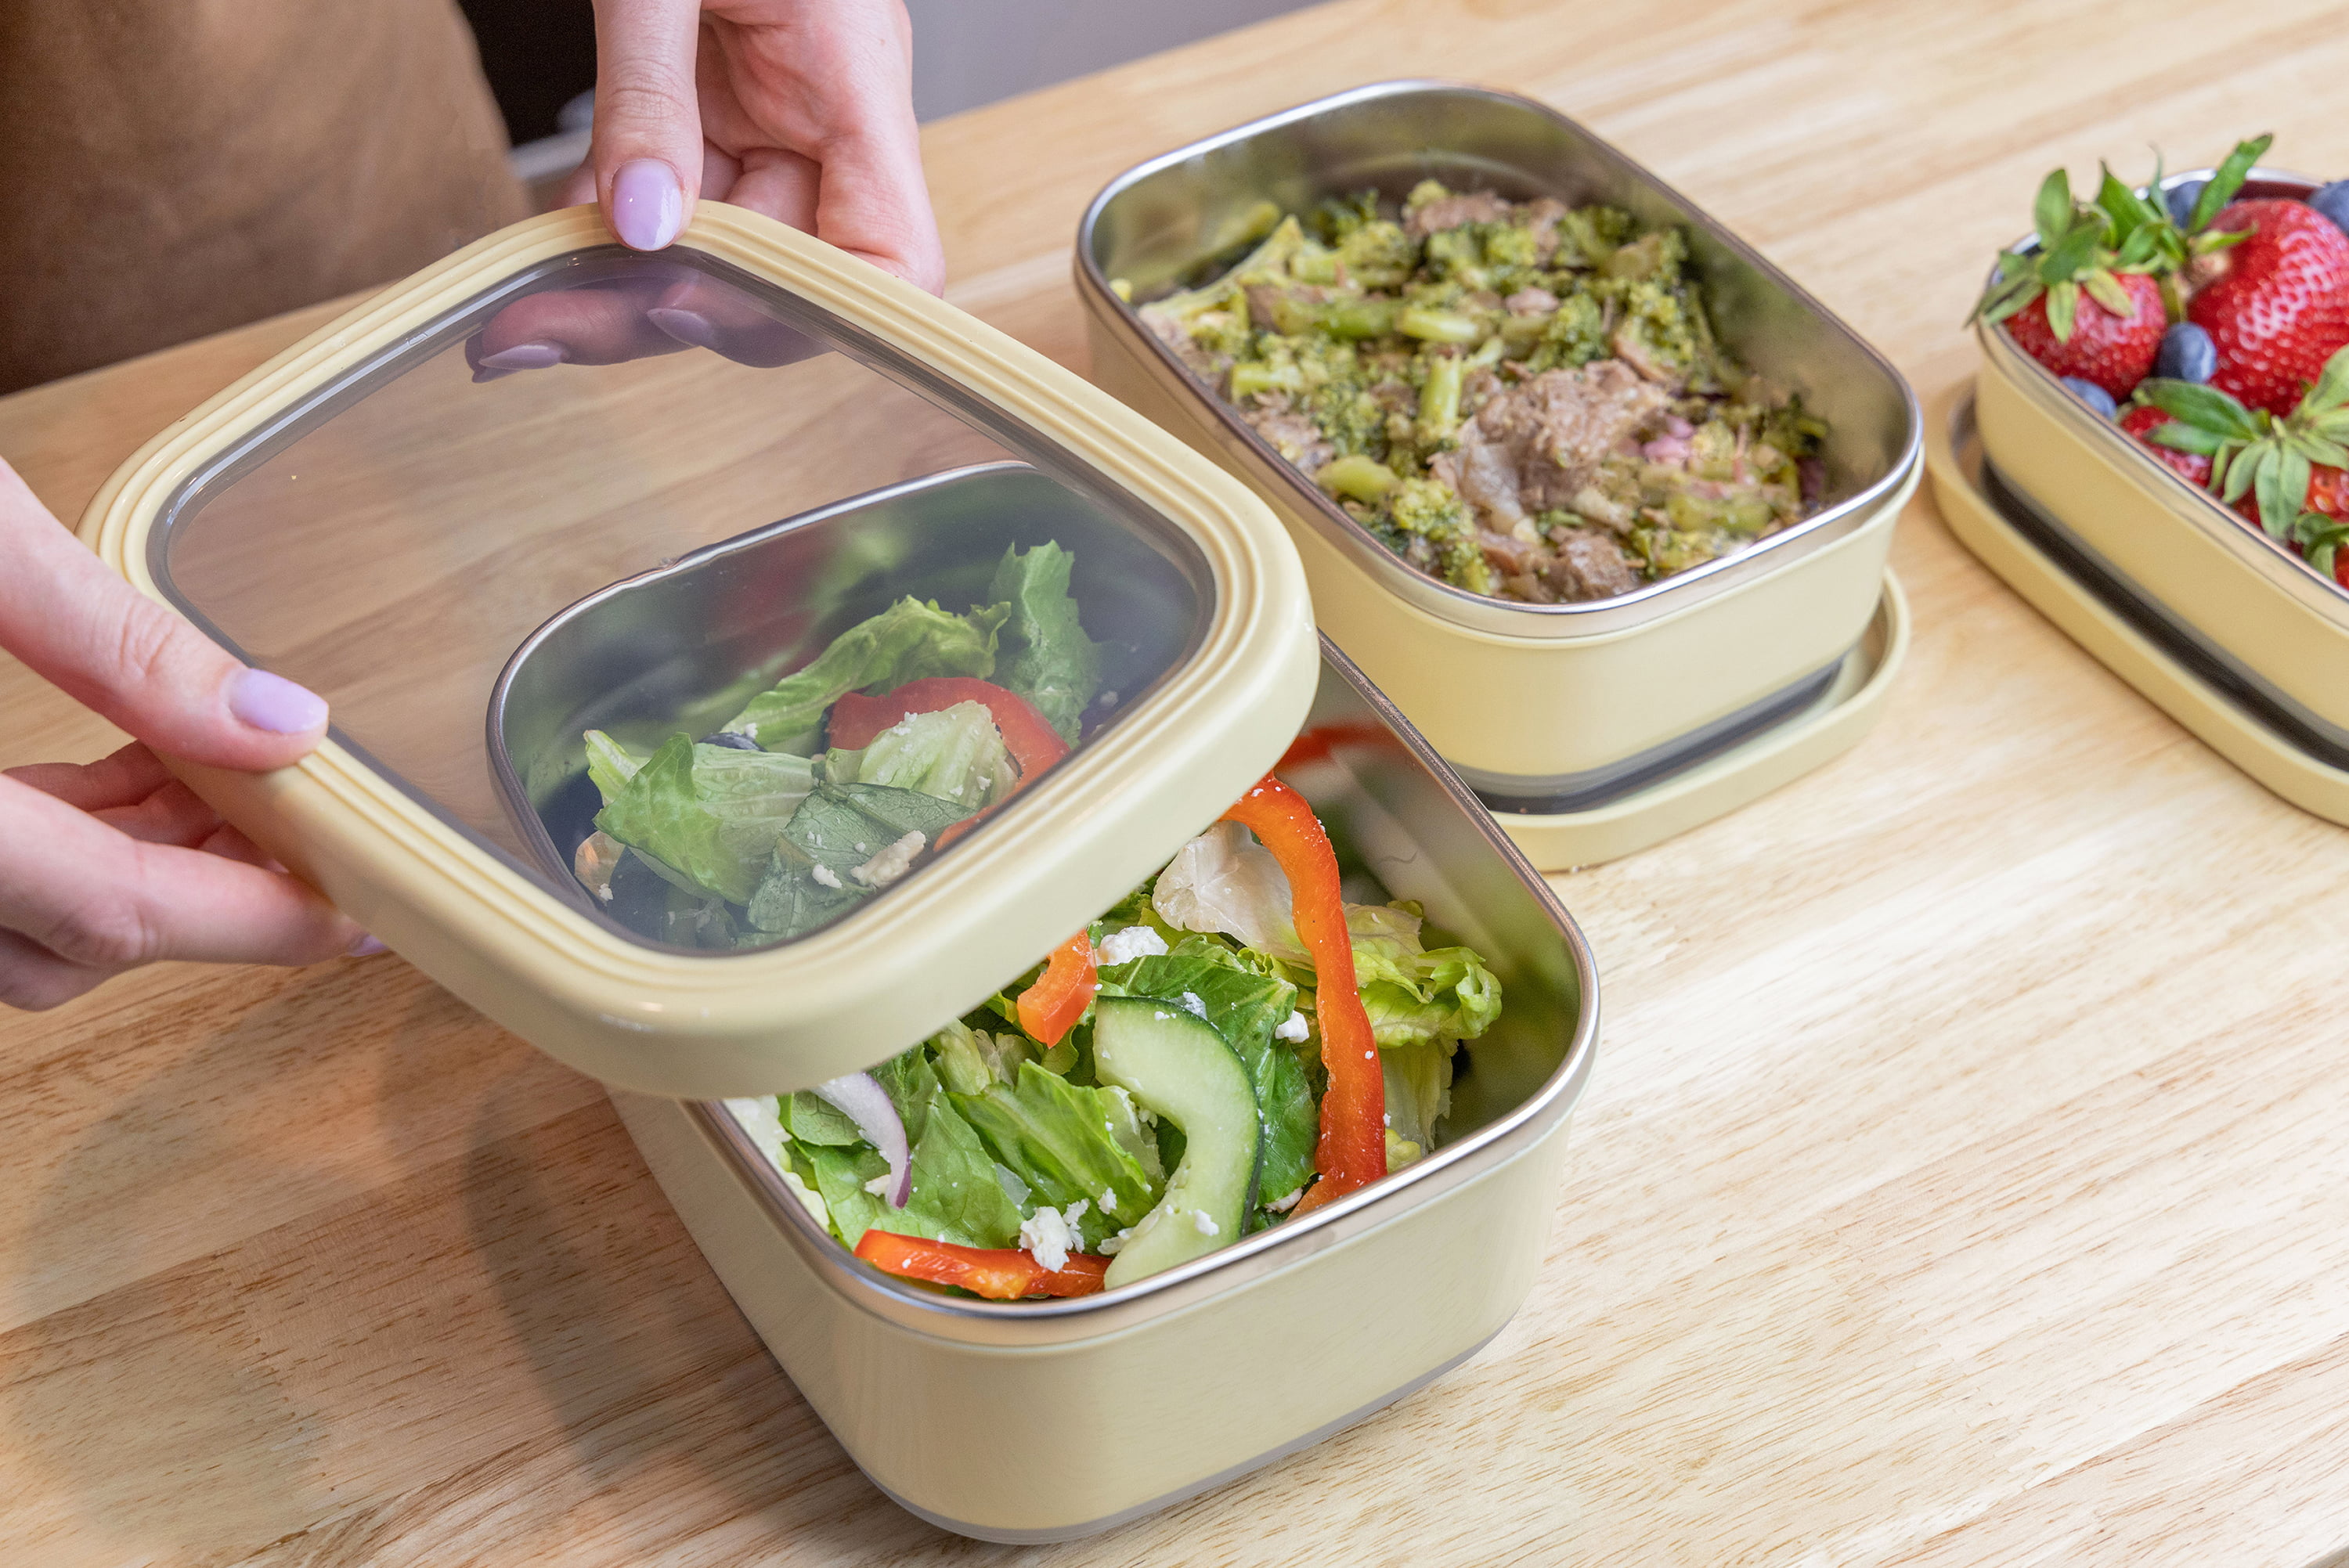 MIRA 8 cup Salad Bowl Lunch Container with Lid, Stainless Steel Interior,  Not Insulated, Kitchen Food Storage, Slate Blue